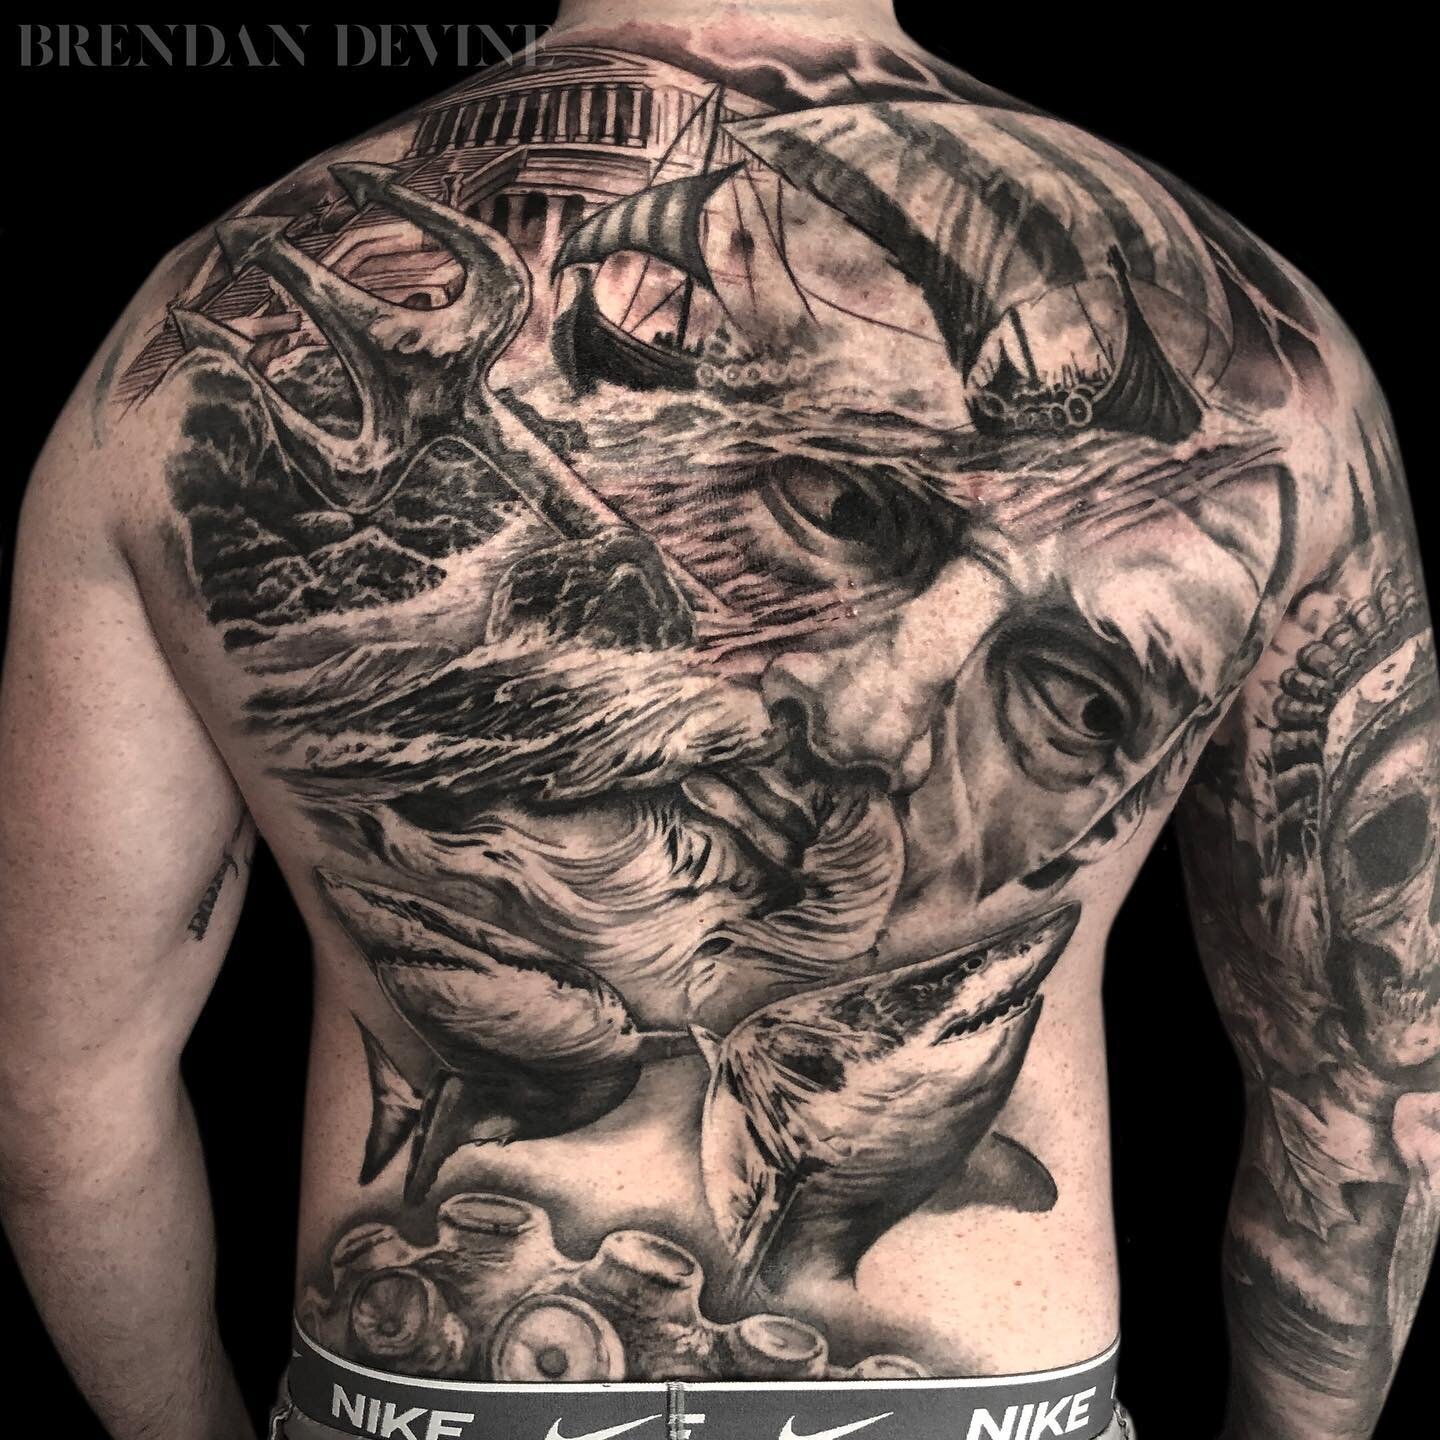 Inching closer on Ryan's back! Swipe for for a better look at what we added and what healed. Thanks as always Ry!
.
.
.
#blackandgreytattoo #tattooartist #sharktattoo #shark #poseidontattoo #poseidon #silverbackink #neotat #neotatmachines #eikondevic